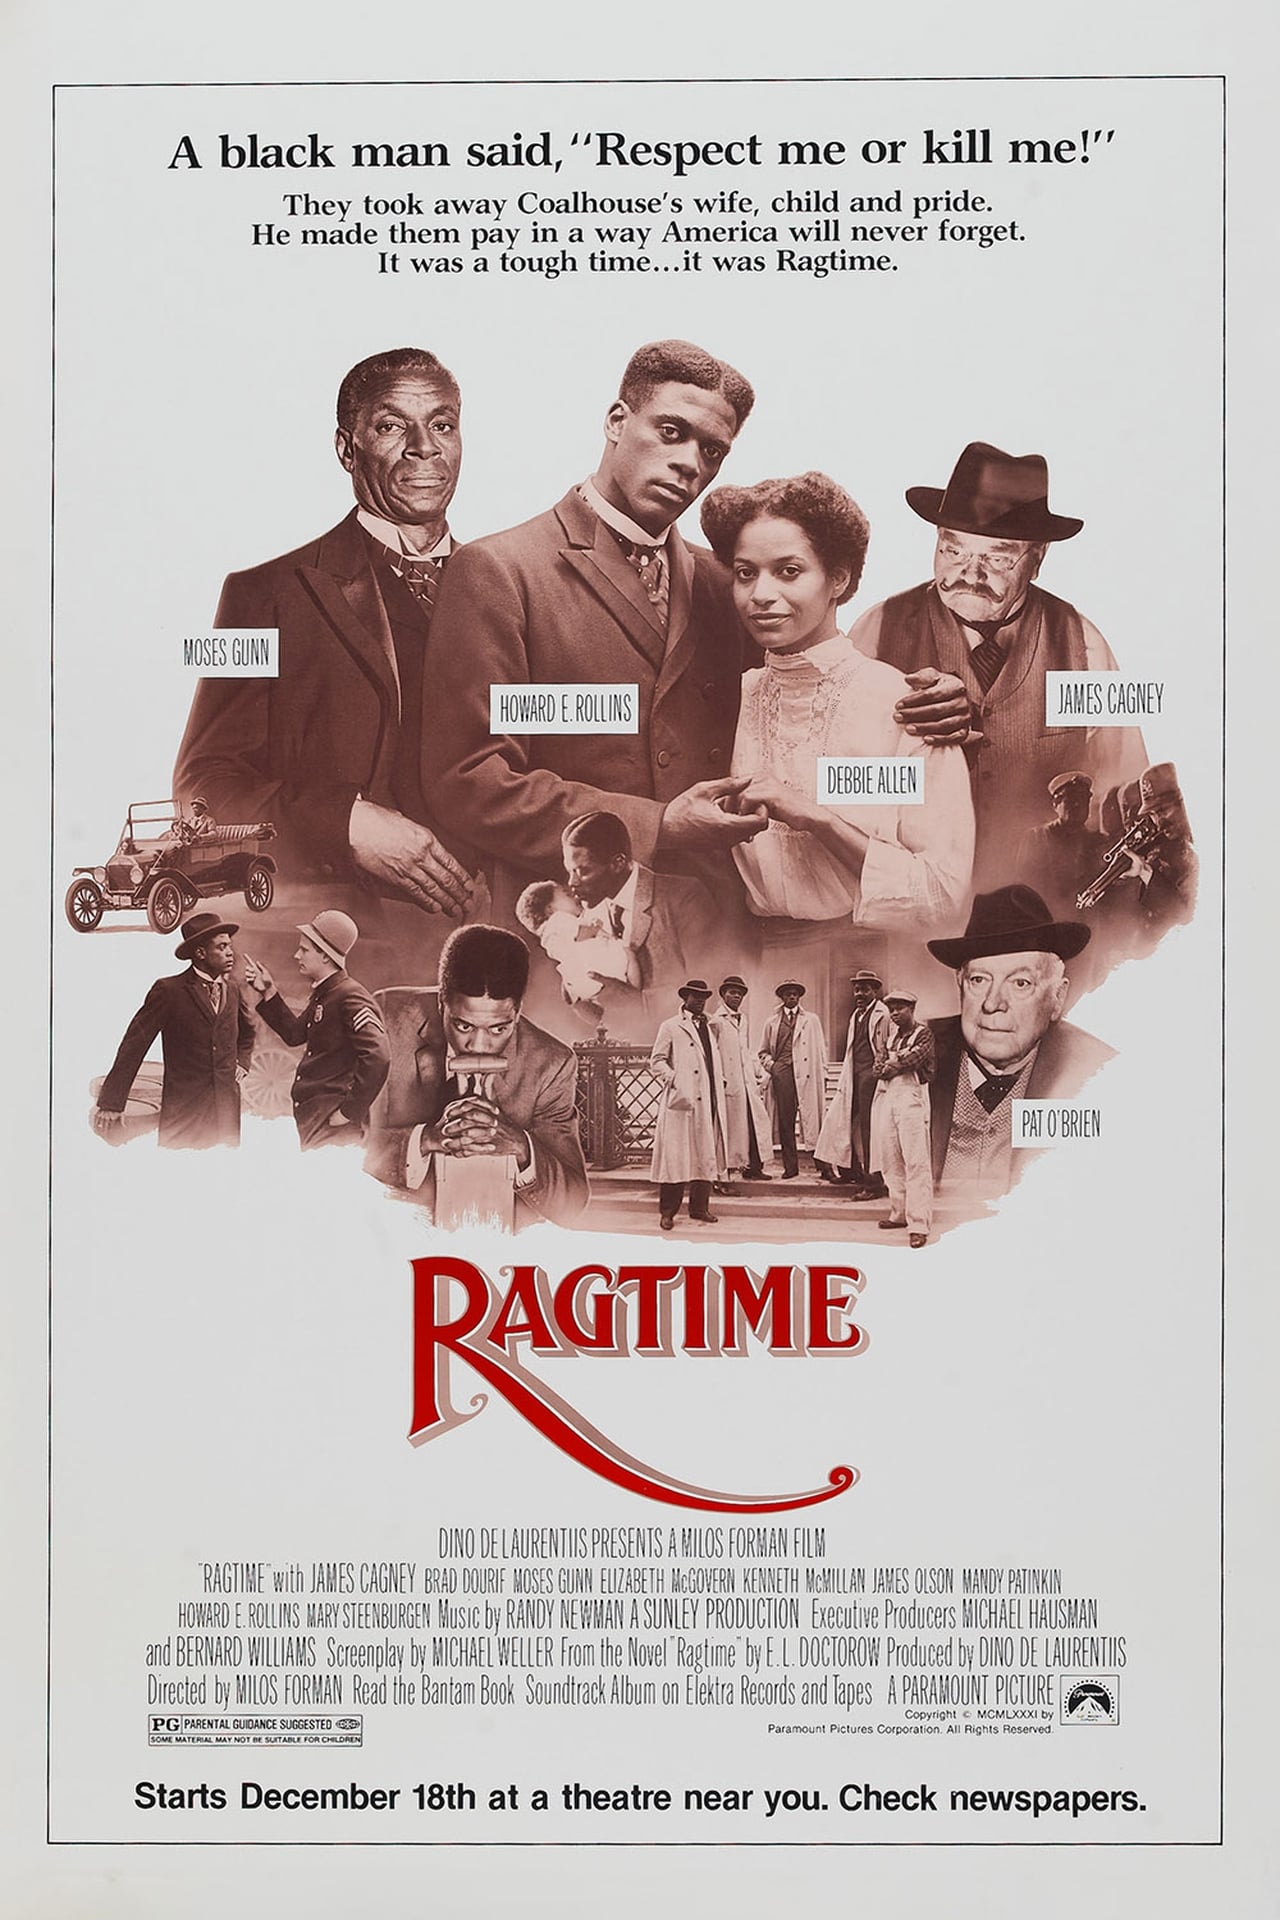 language in ragtime musical